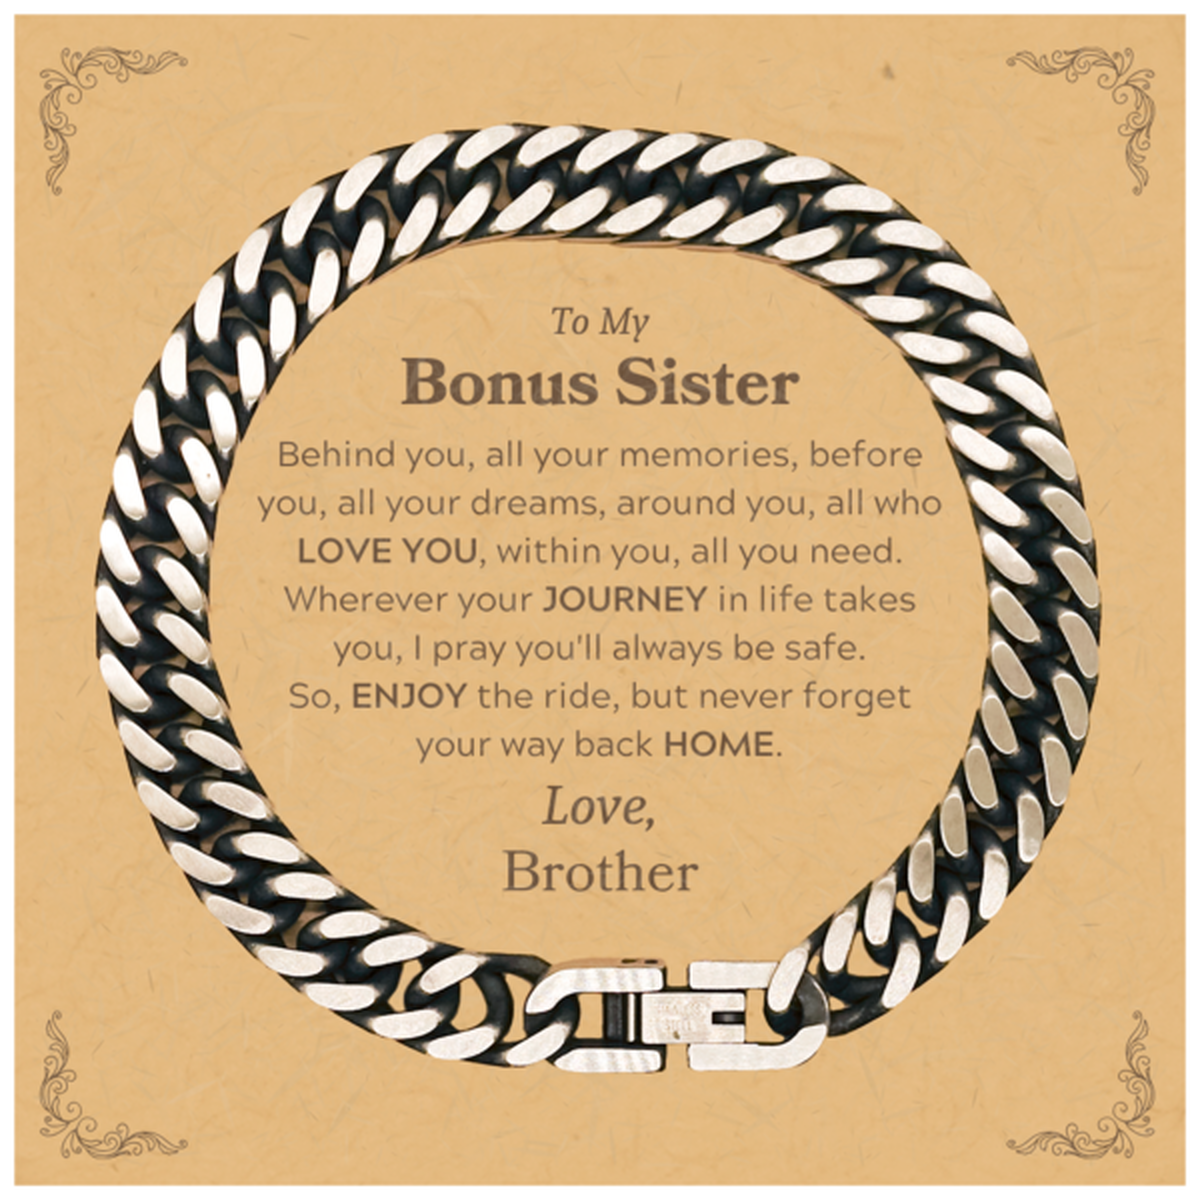 To My Bonus Sister Graduation Gifts from Brother, Bonus Sister Cuban Link Chain Bracelet Christmas Birthday Gifts for Bonus Sister Behind you, all your memories, before you, all your dreams. Love, Brother